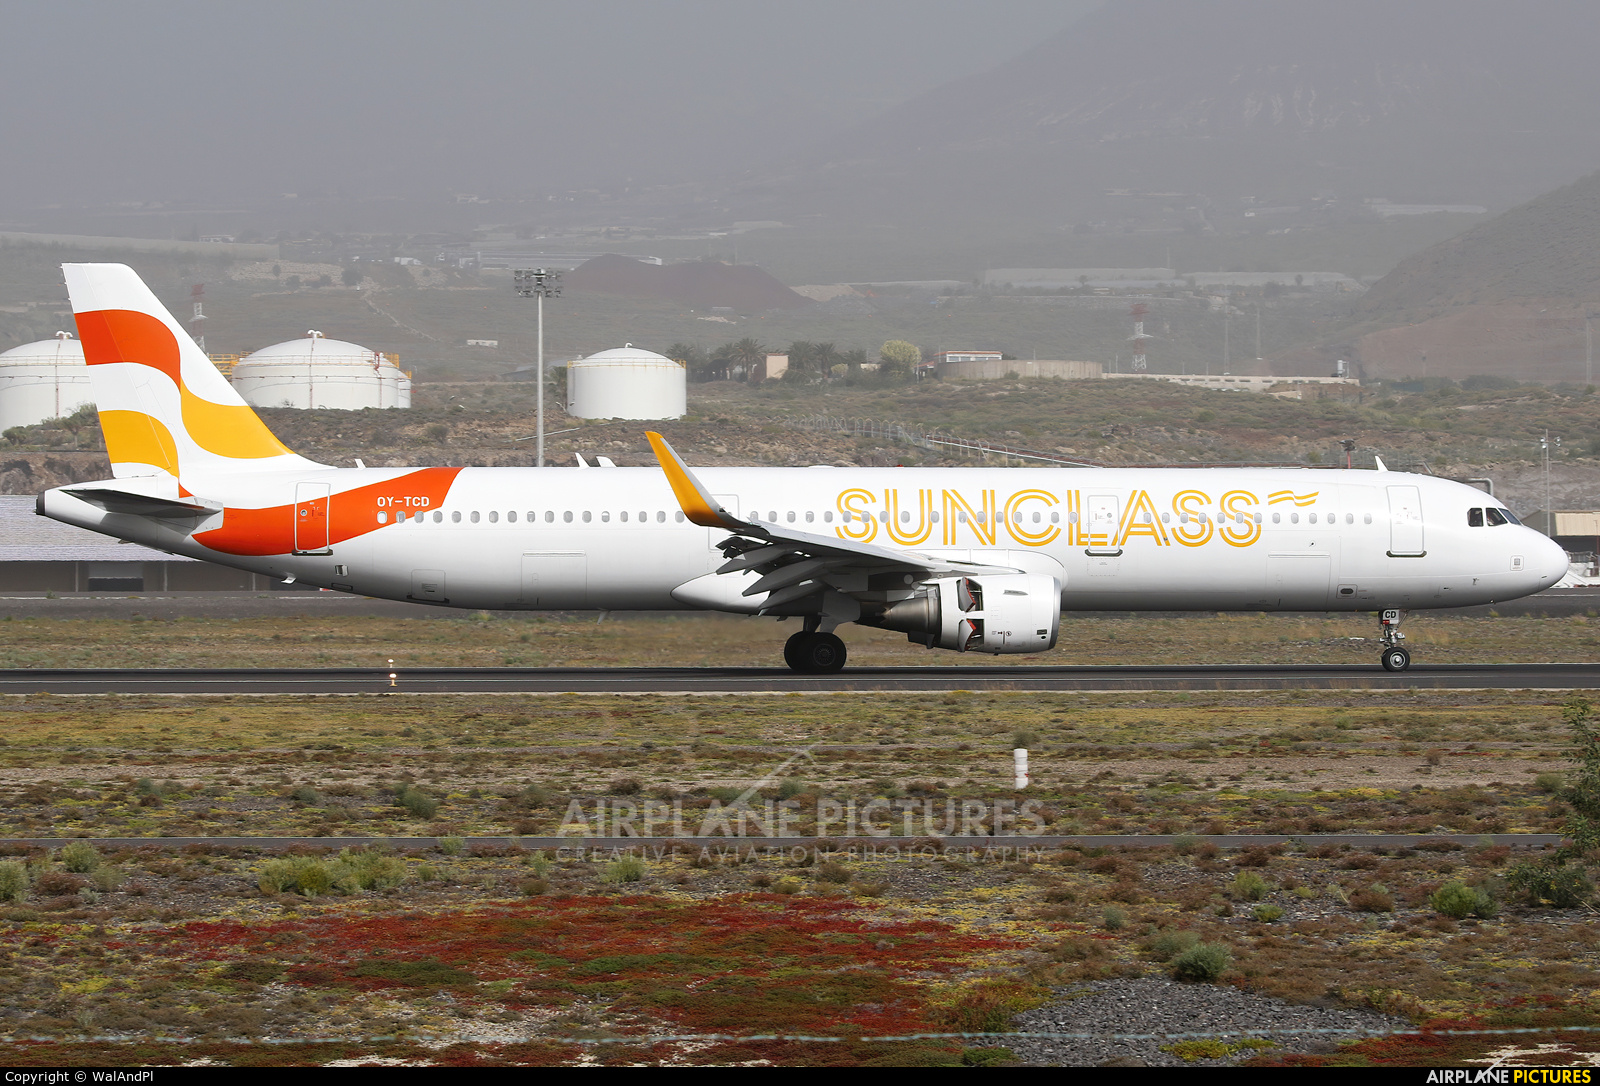 Sunclass Airlines OY-TCD aircraft at Tenerife Sur - Reina Sofia